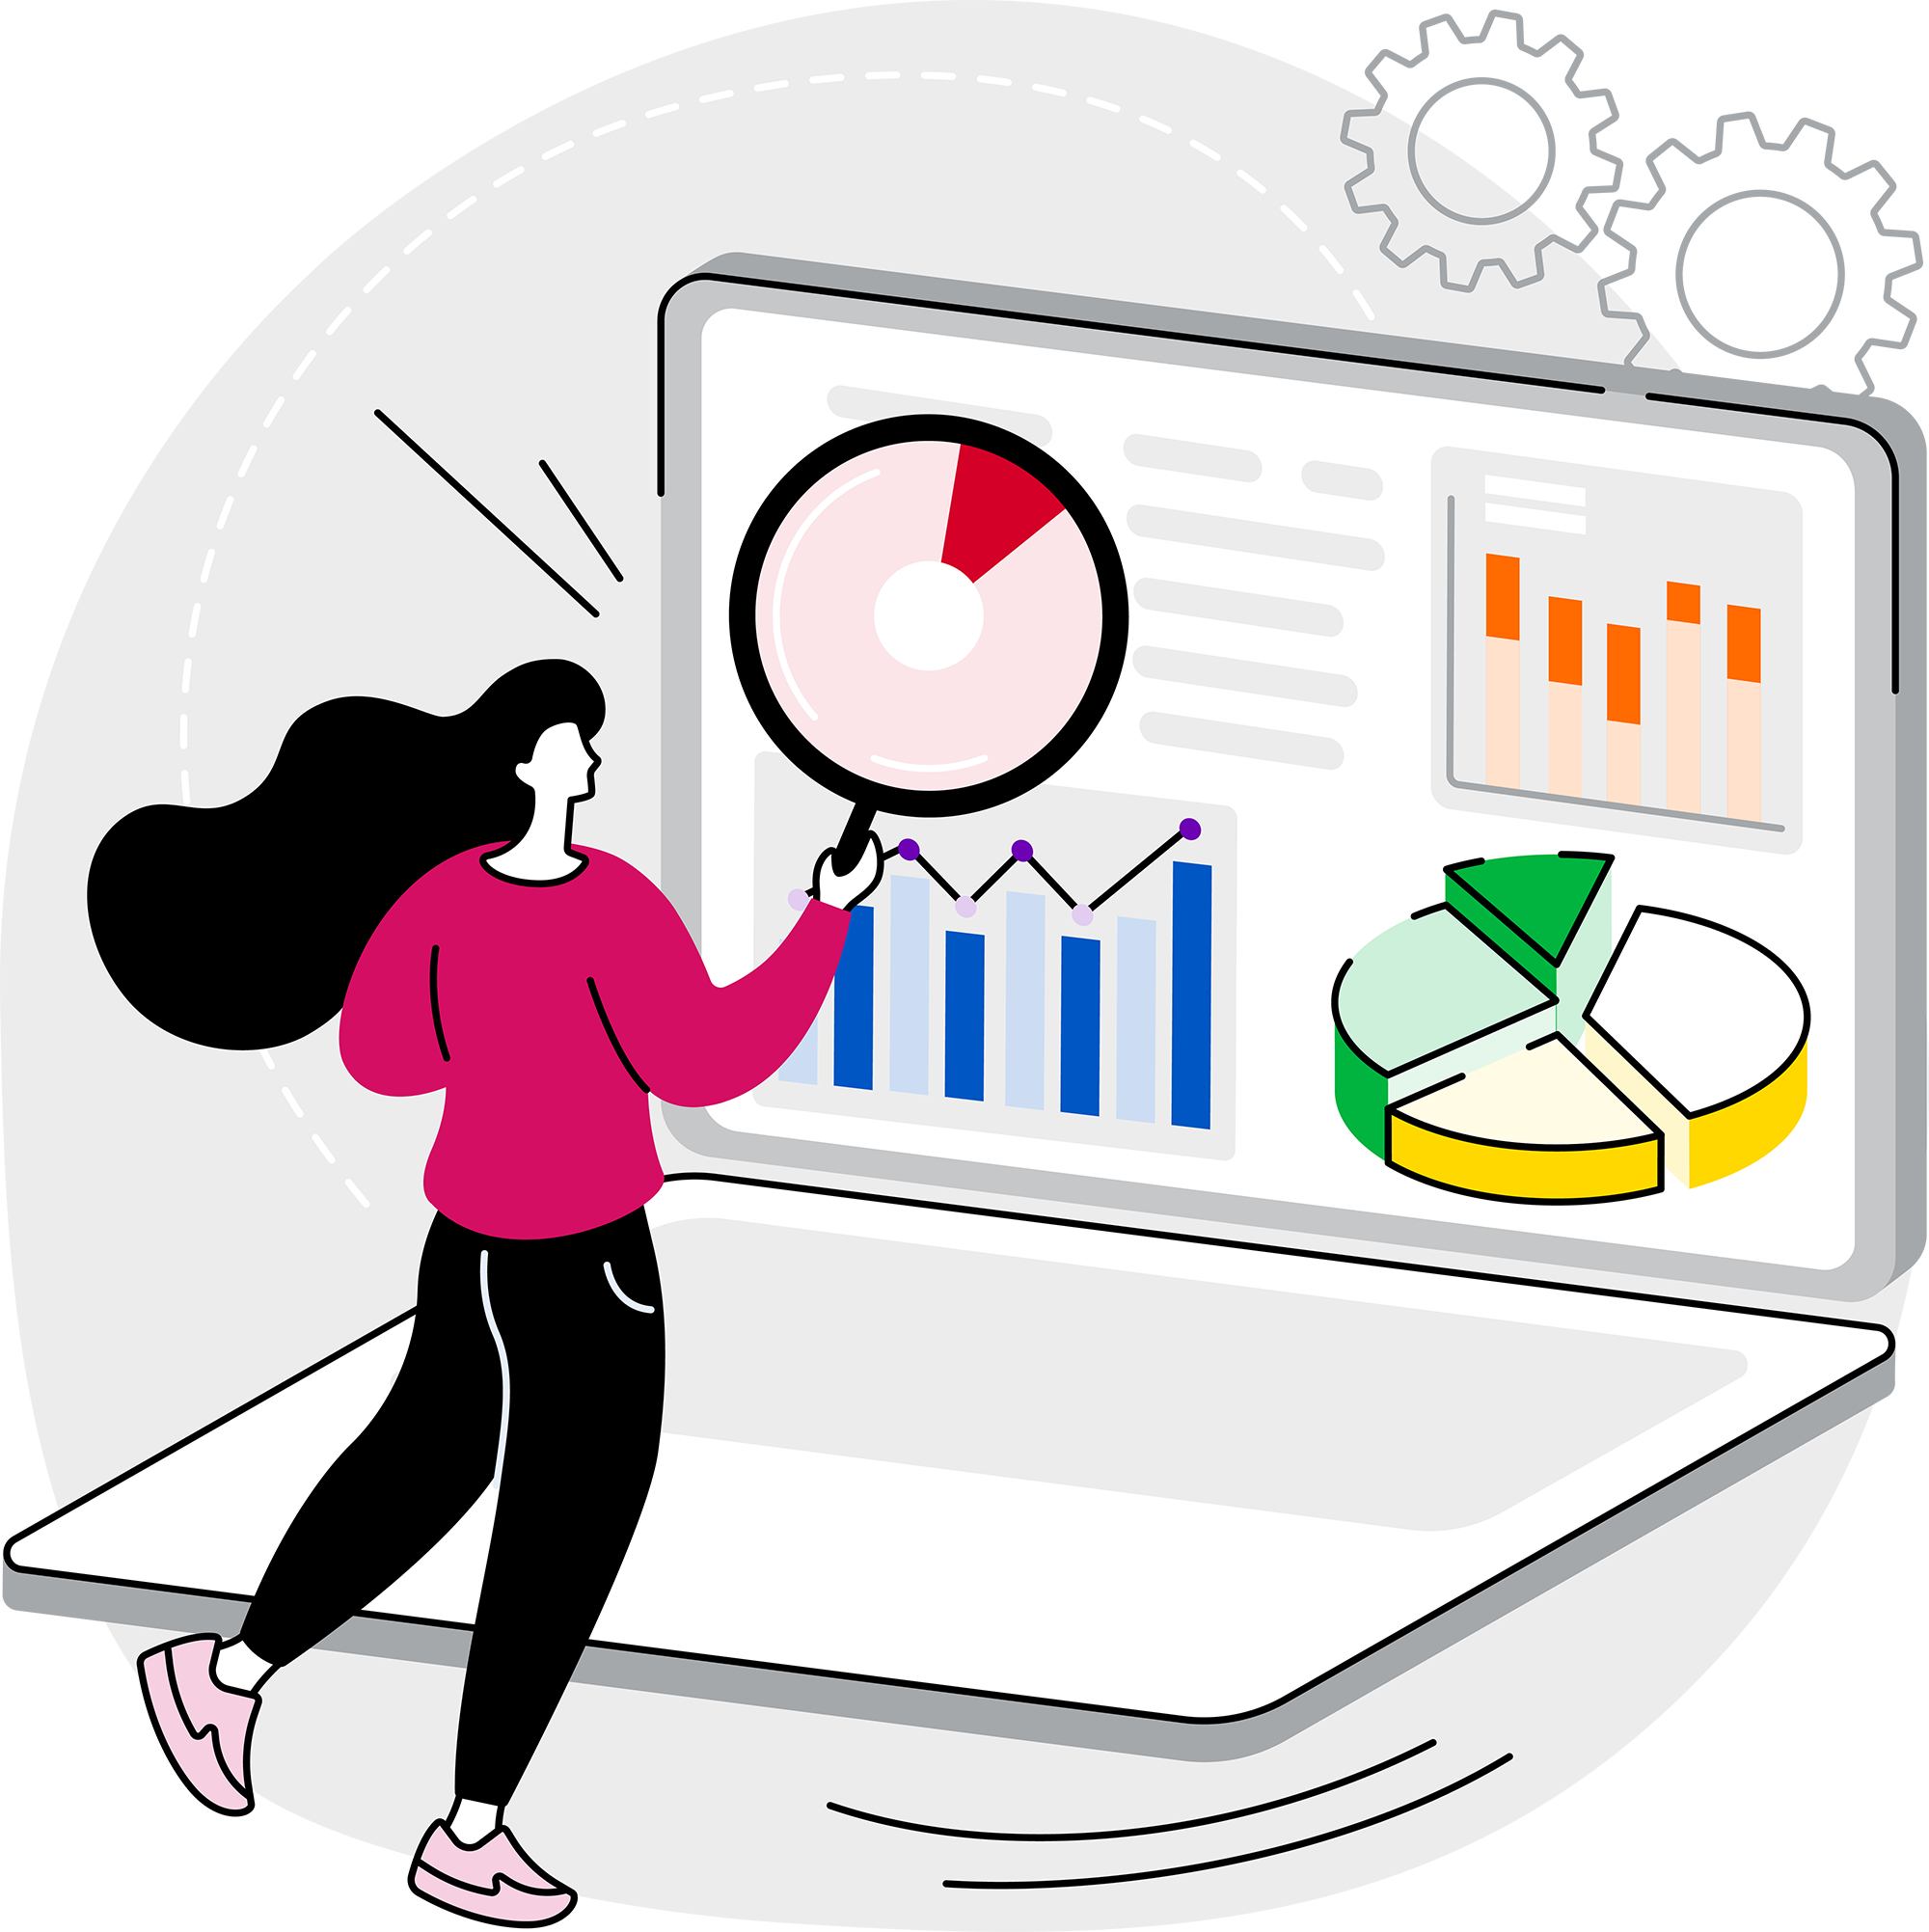 A simple, modern graphic illustration of a stylized woman using a comically oversized magnifying glass to examine the various elements of a pitch deck, appearing on a similarly oversized laptop.